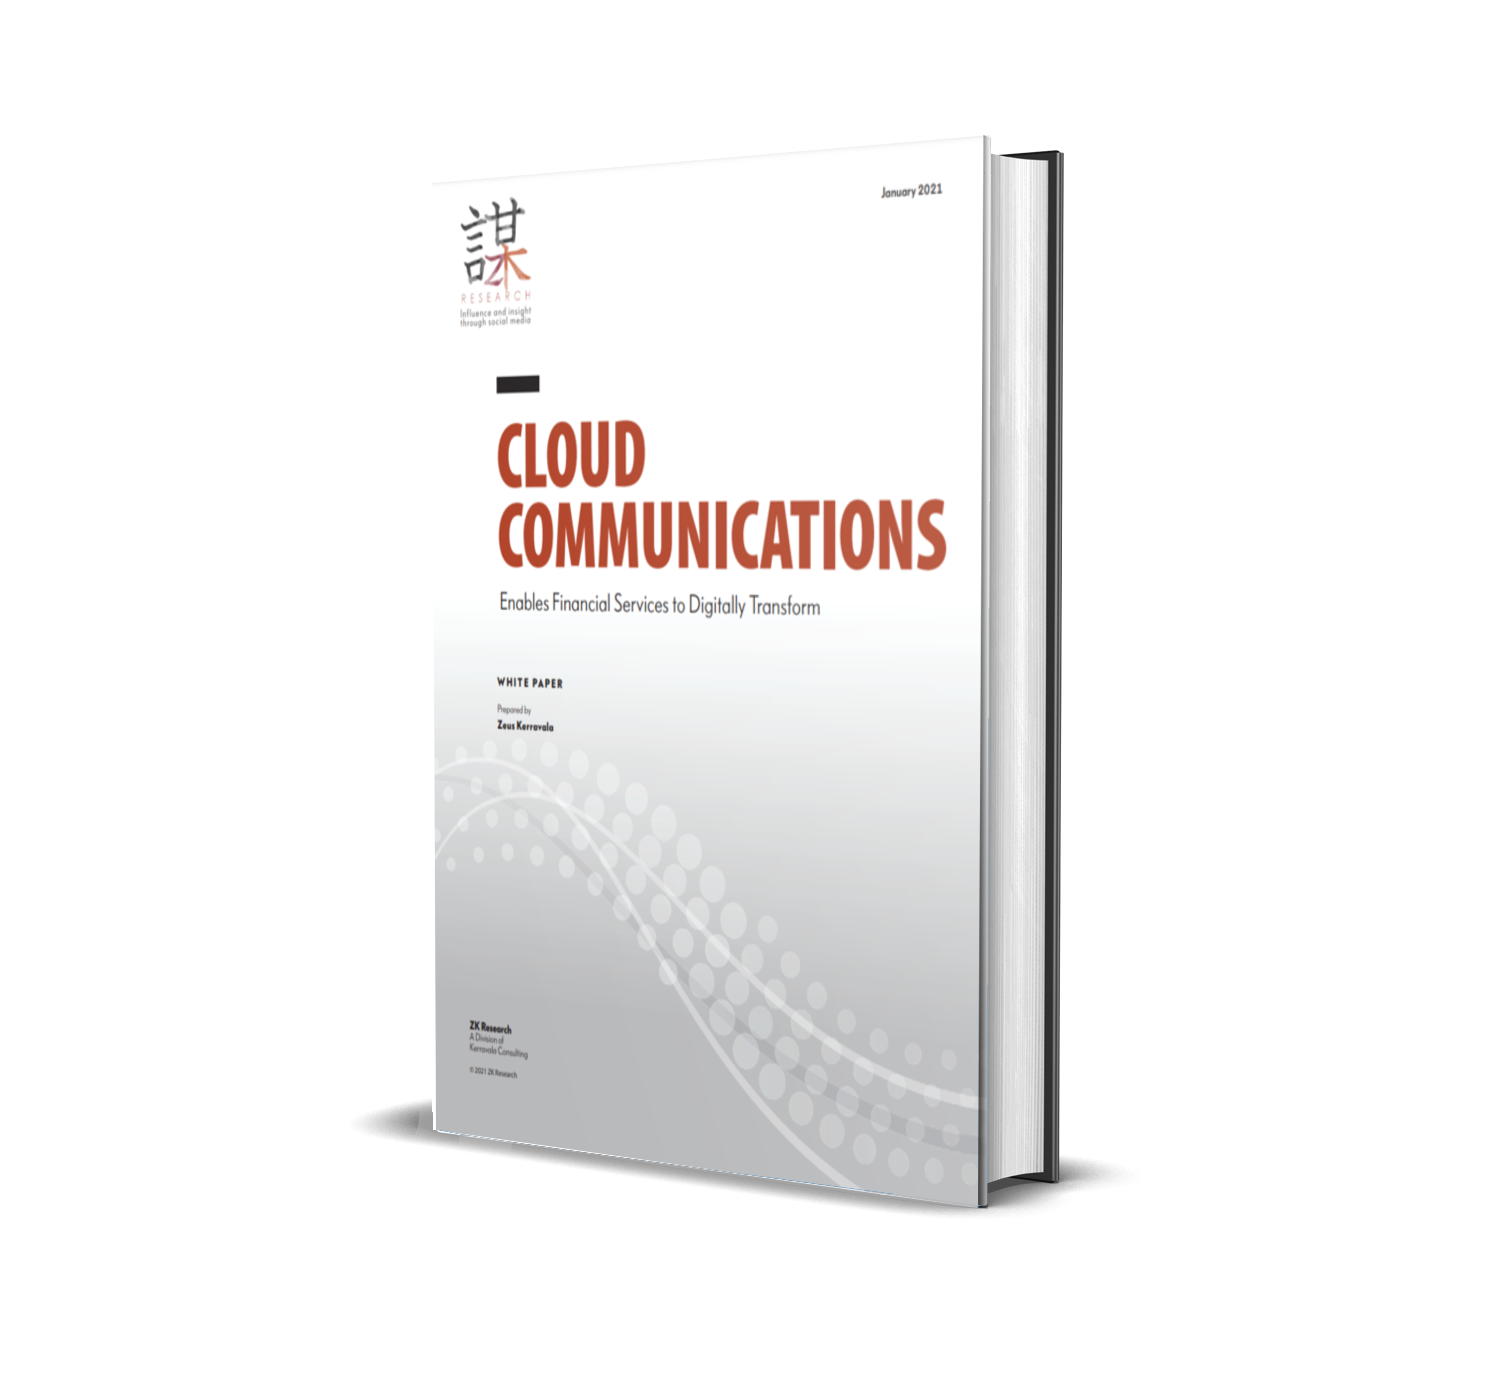 Cloud Communications Enables Financial Serices to Digitally Tranform